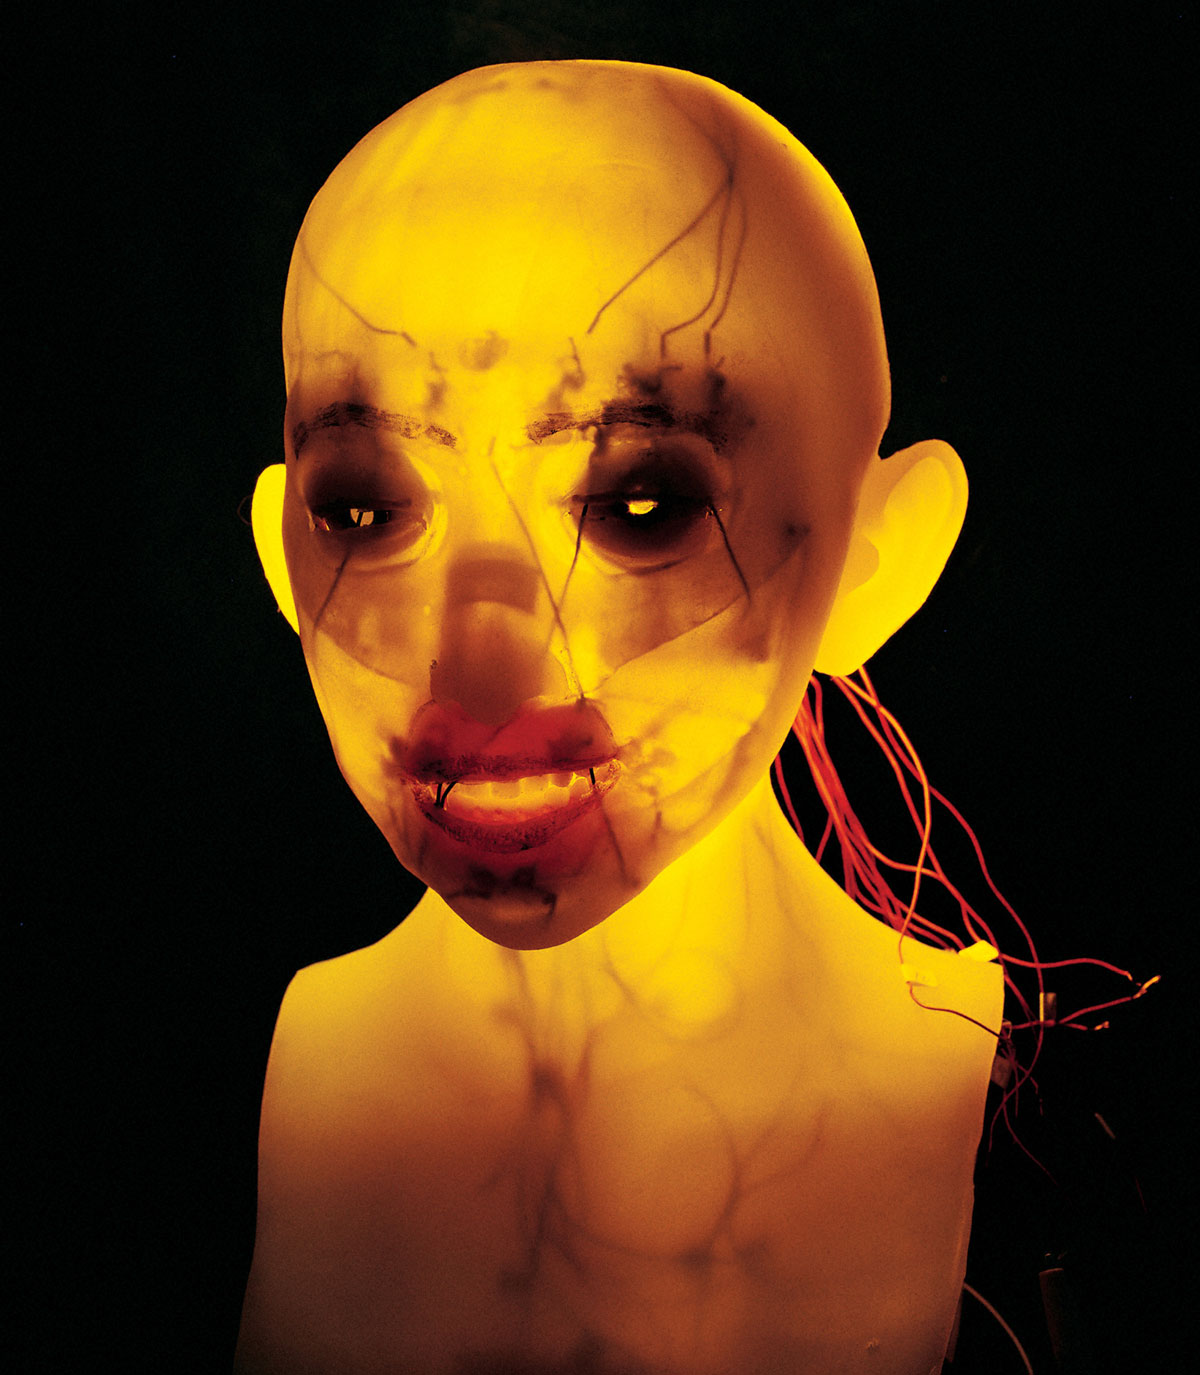 A photograph of an orange glowing bust of a second-generation face robot from Hara-Kobayashi Laboratory.